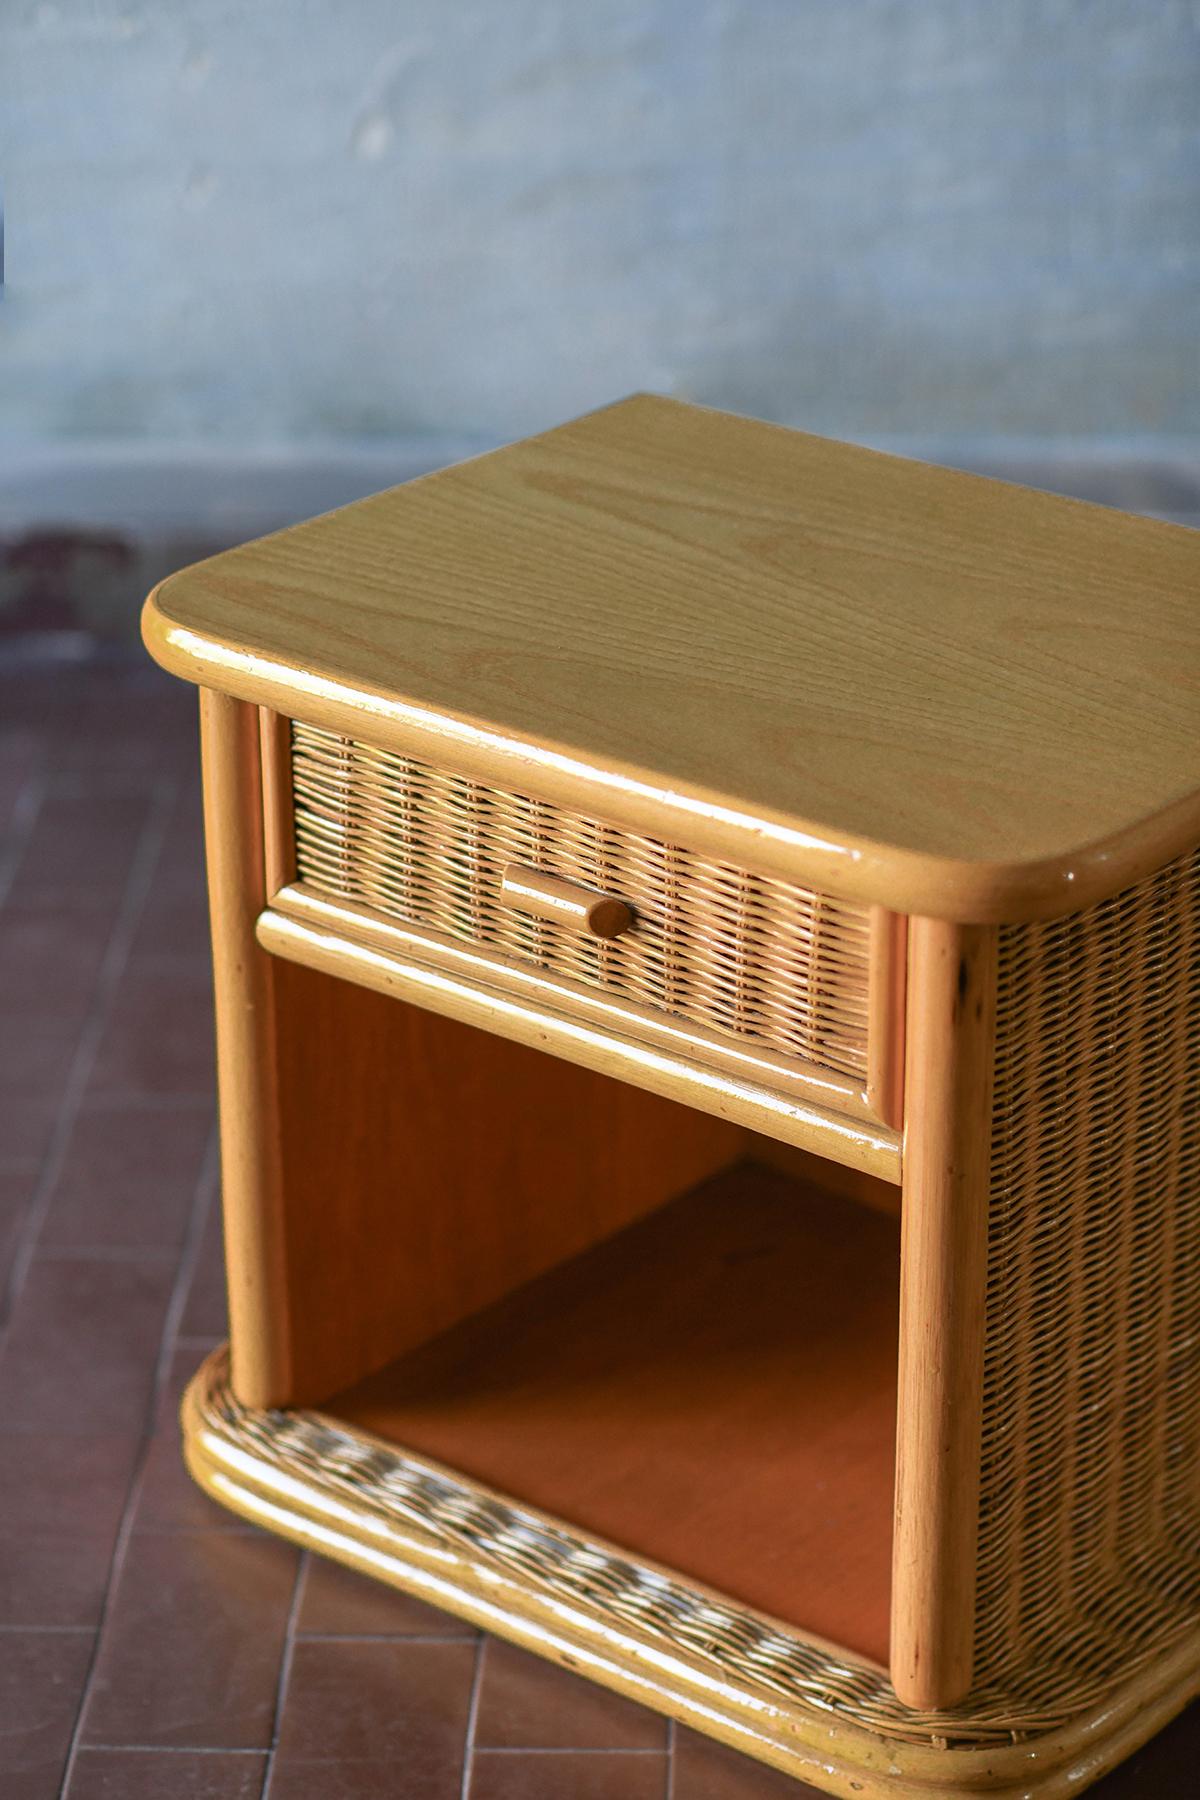 Pair of wooden and wicker bedside tables with drawer, Italy 1980.
Product details
Dimensions: 57 W x 51 H x 44 D cm